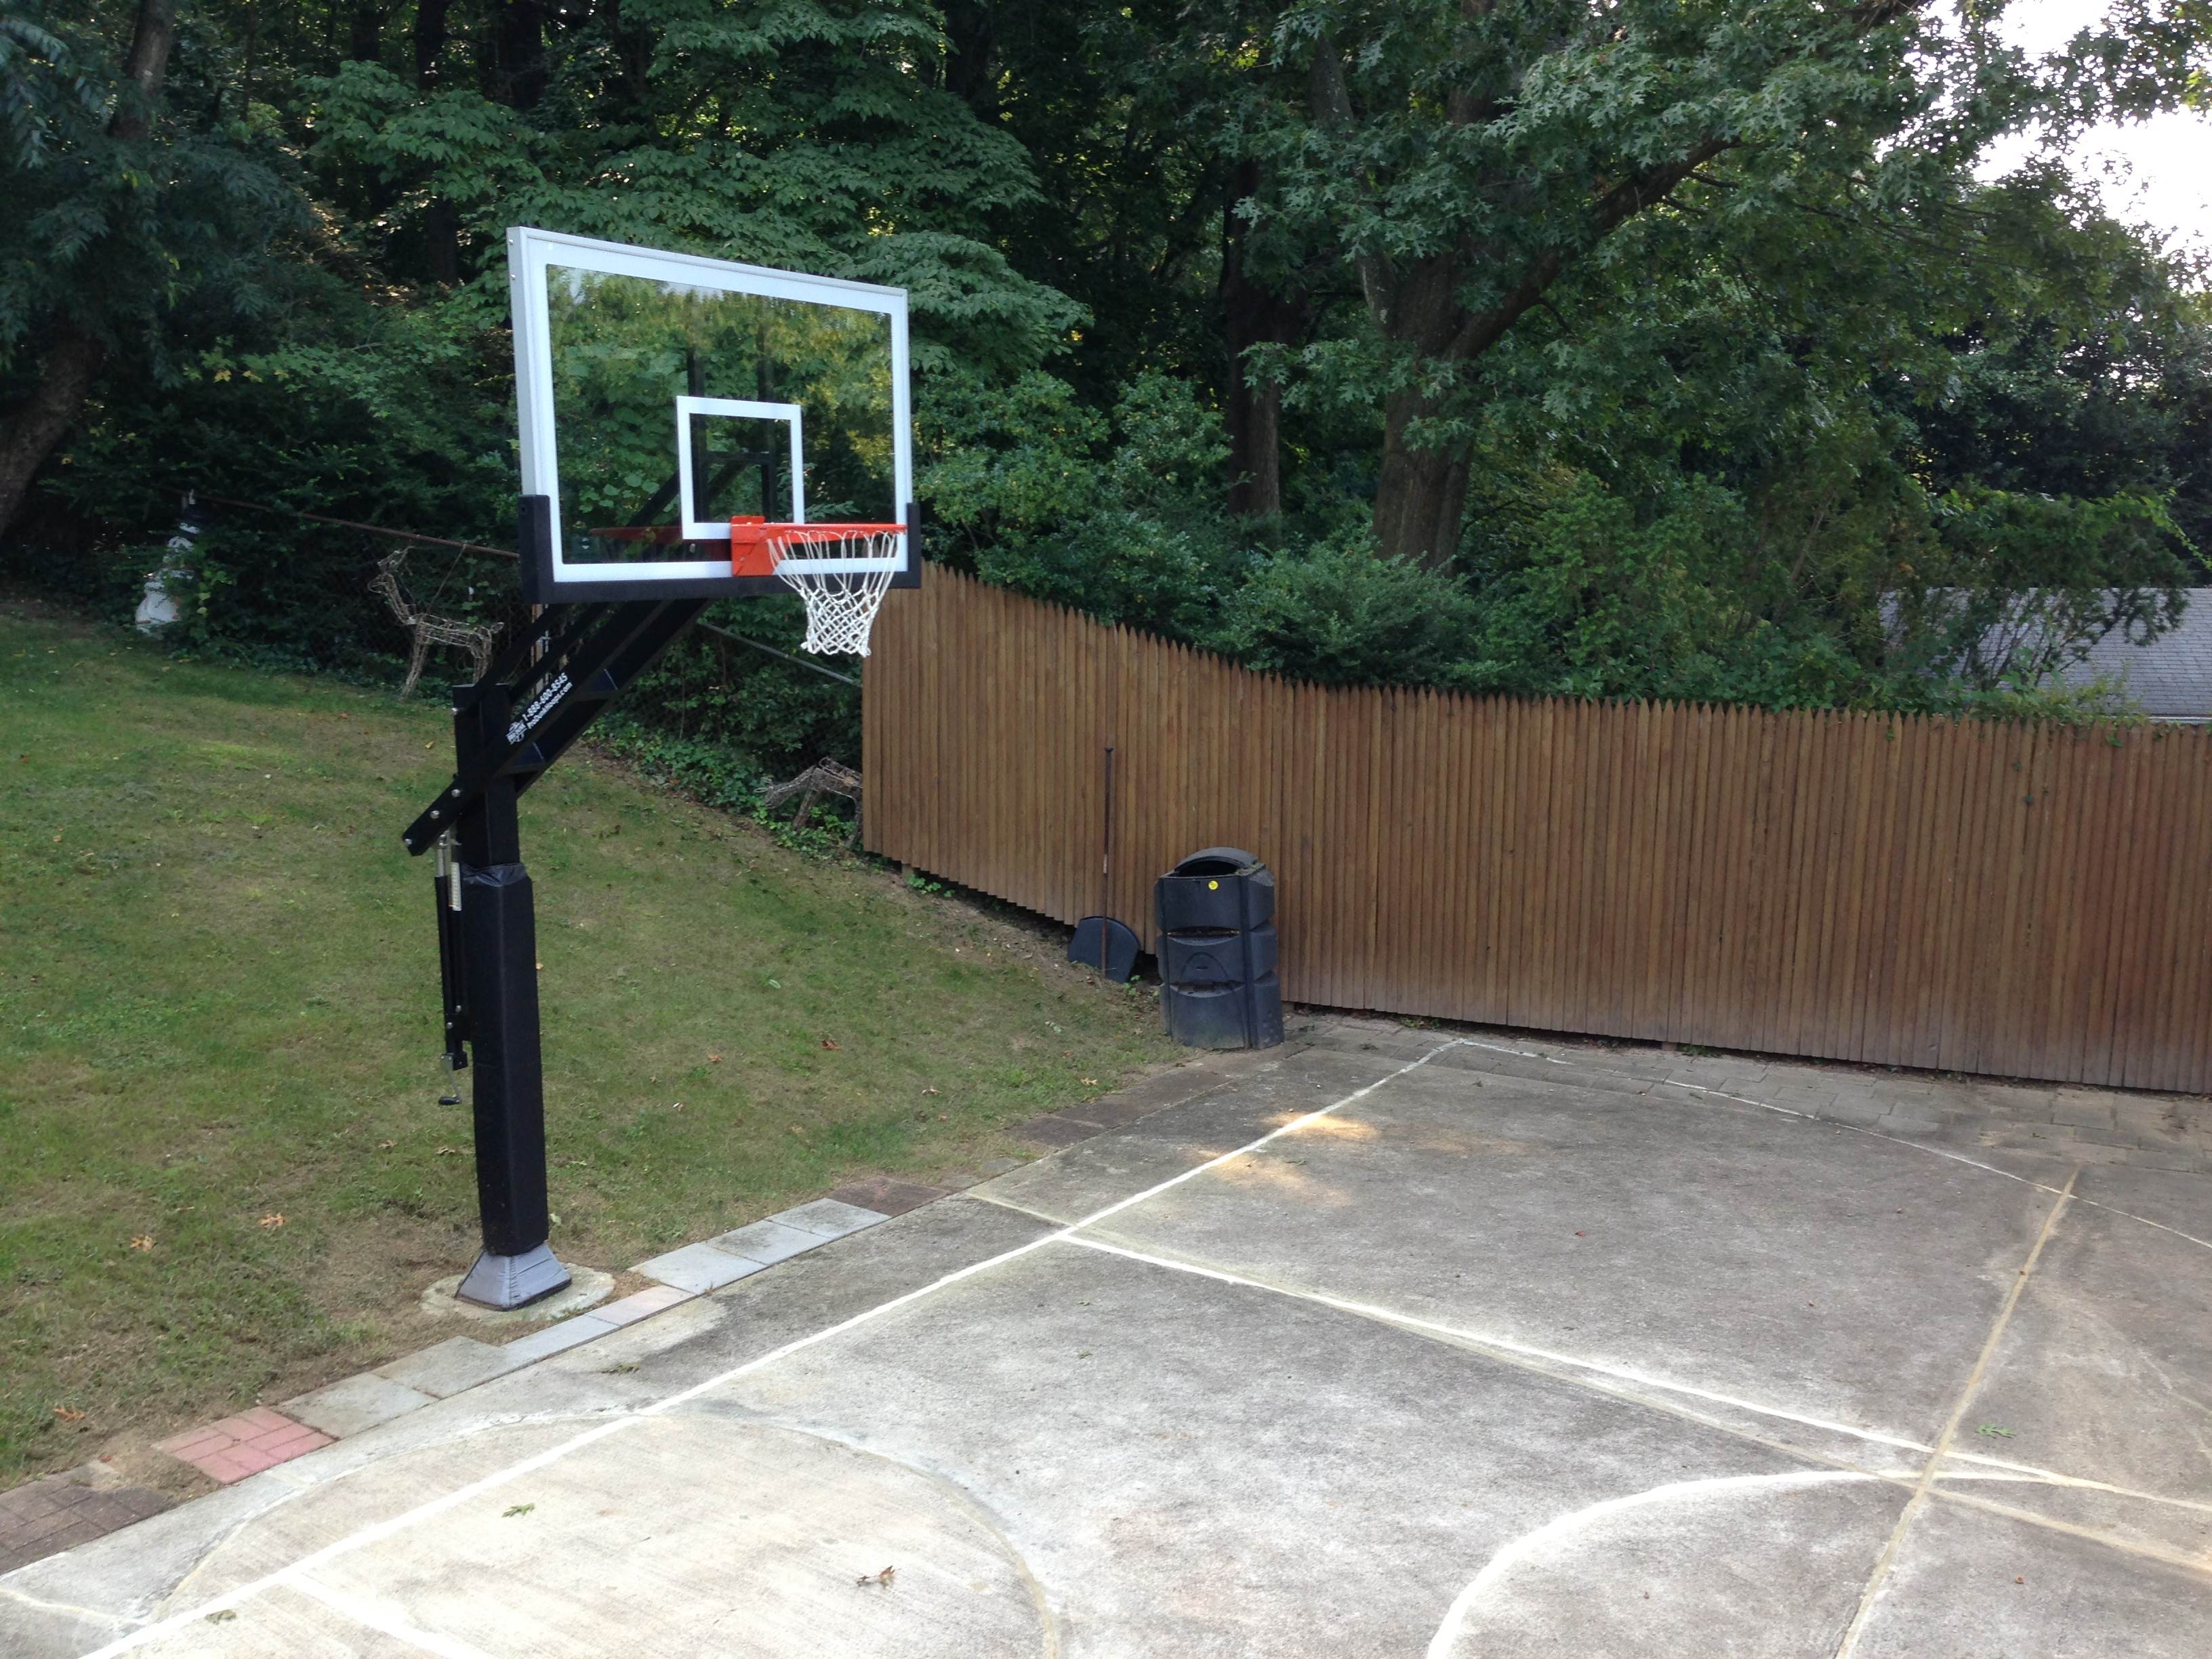 Pavers add a runway about the width of the key (12 feet) underneath the backboard giving players room run underneath without running in the grass.